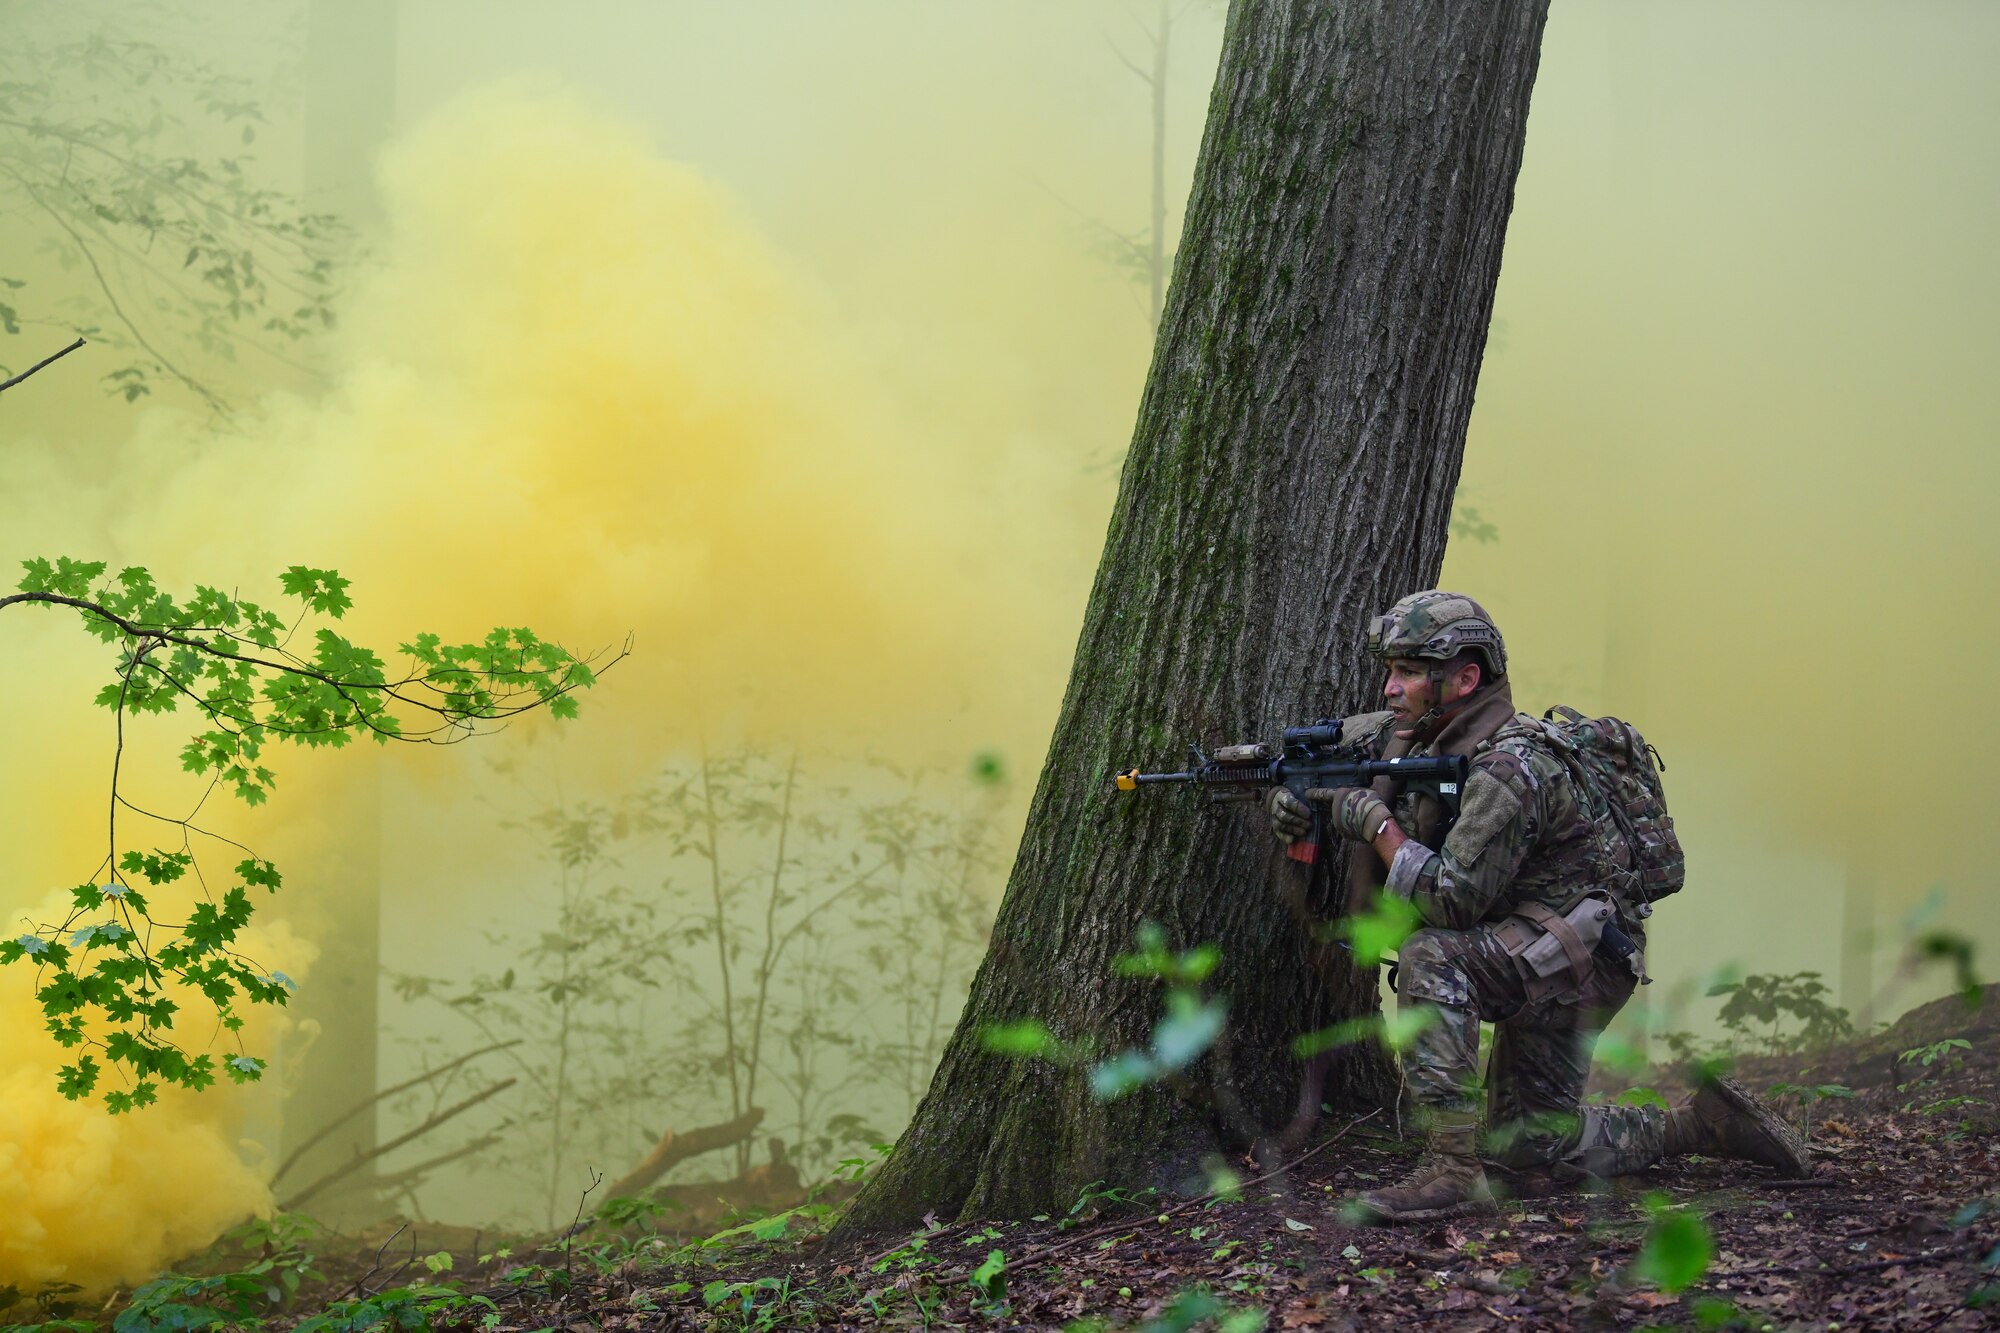 Master Sgt. Daniel Zamora, and Integrated Defense Leadership Course student assigned to the 307th Security Forces Squadron, Barksdale Air Force Base, Louisiana, watches for movement during a static defense exercise at Camp James A. Garfield Joint Military Training Center, Ohio, July 27, 2022.